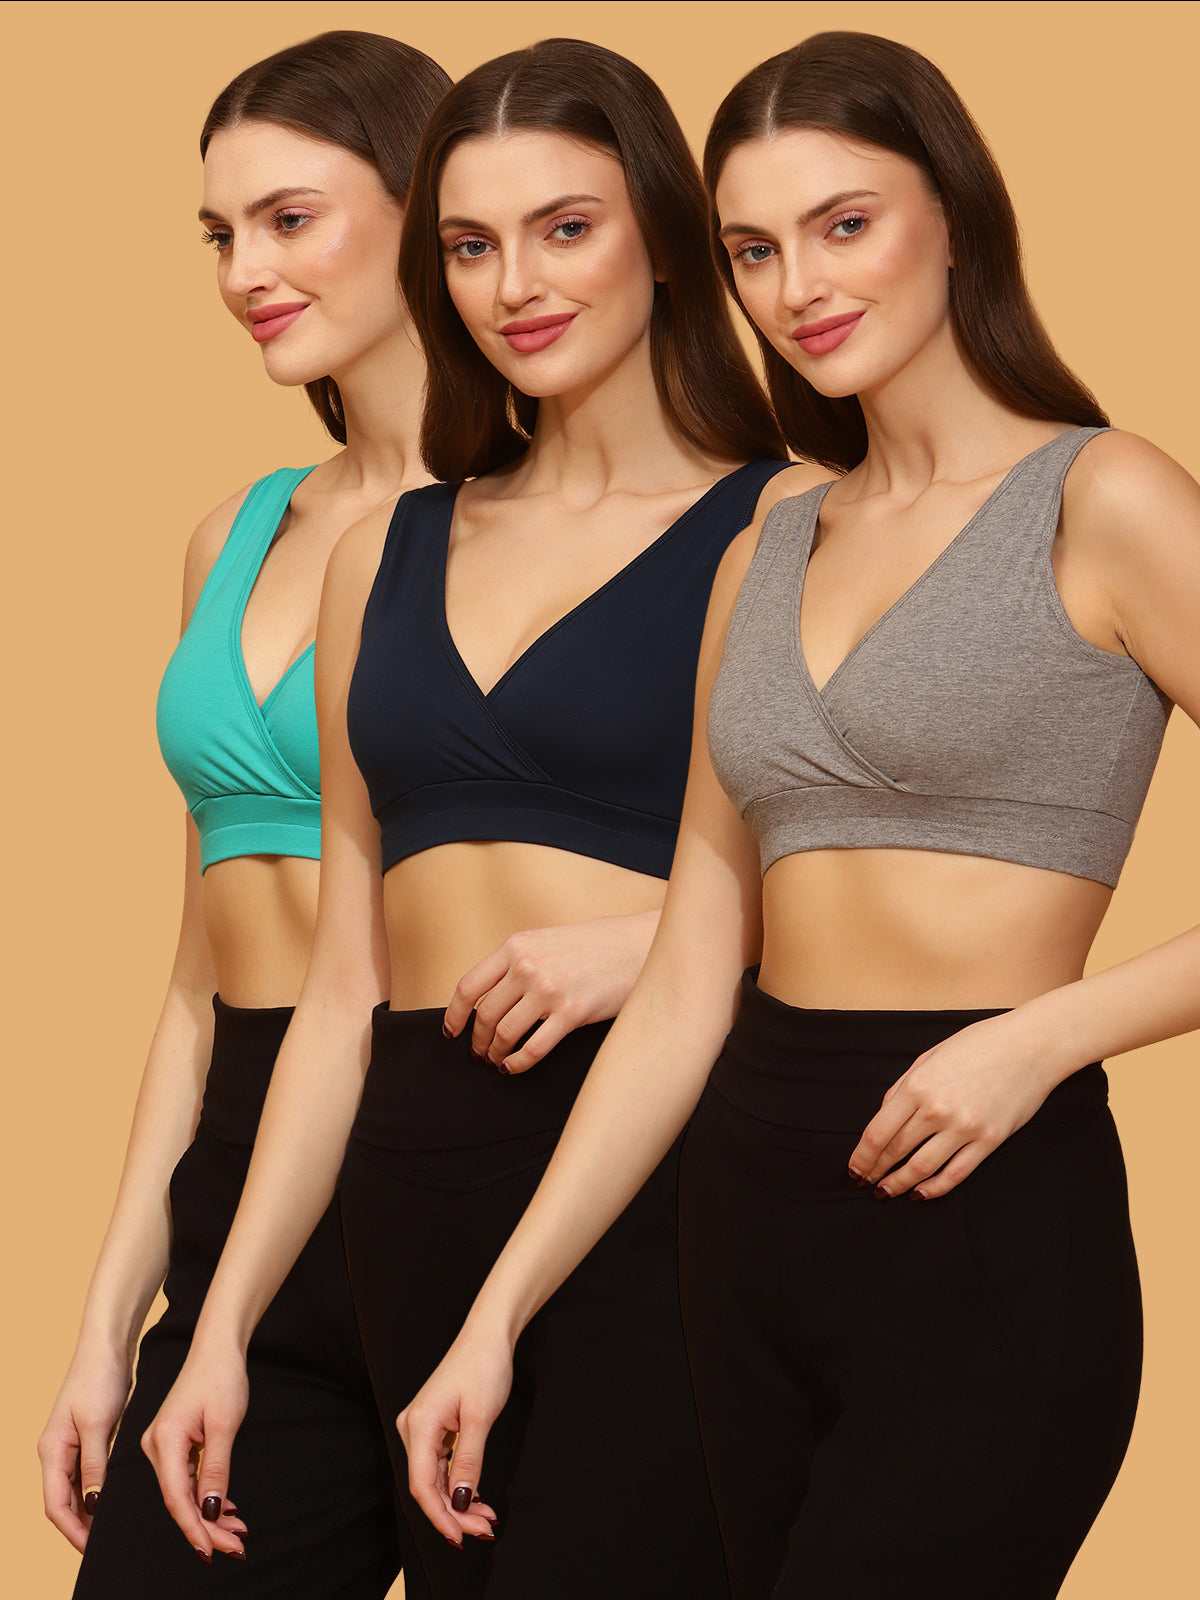 Buy 100% Cotton Maternity Bras - Pack of 3